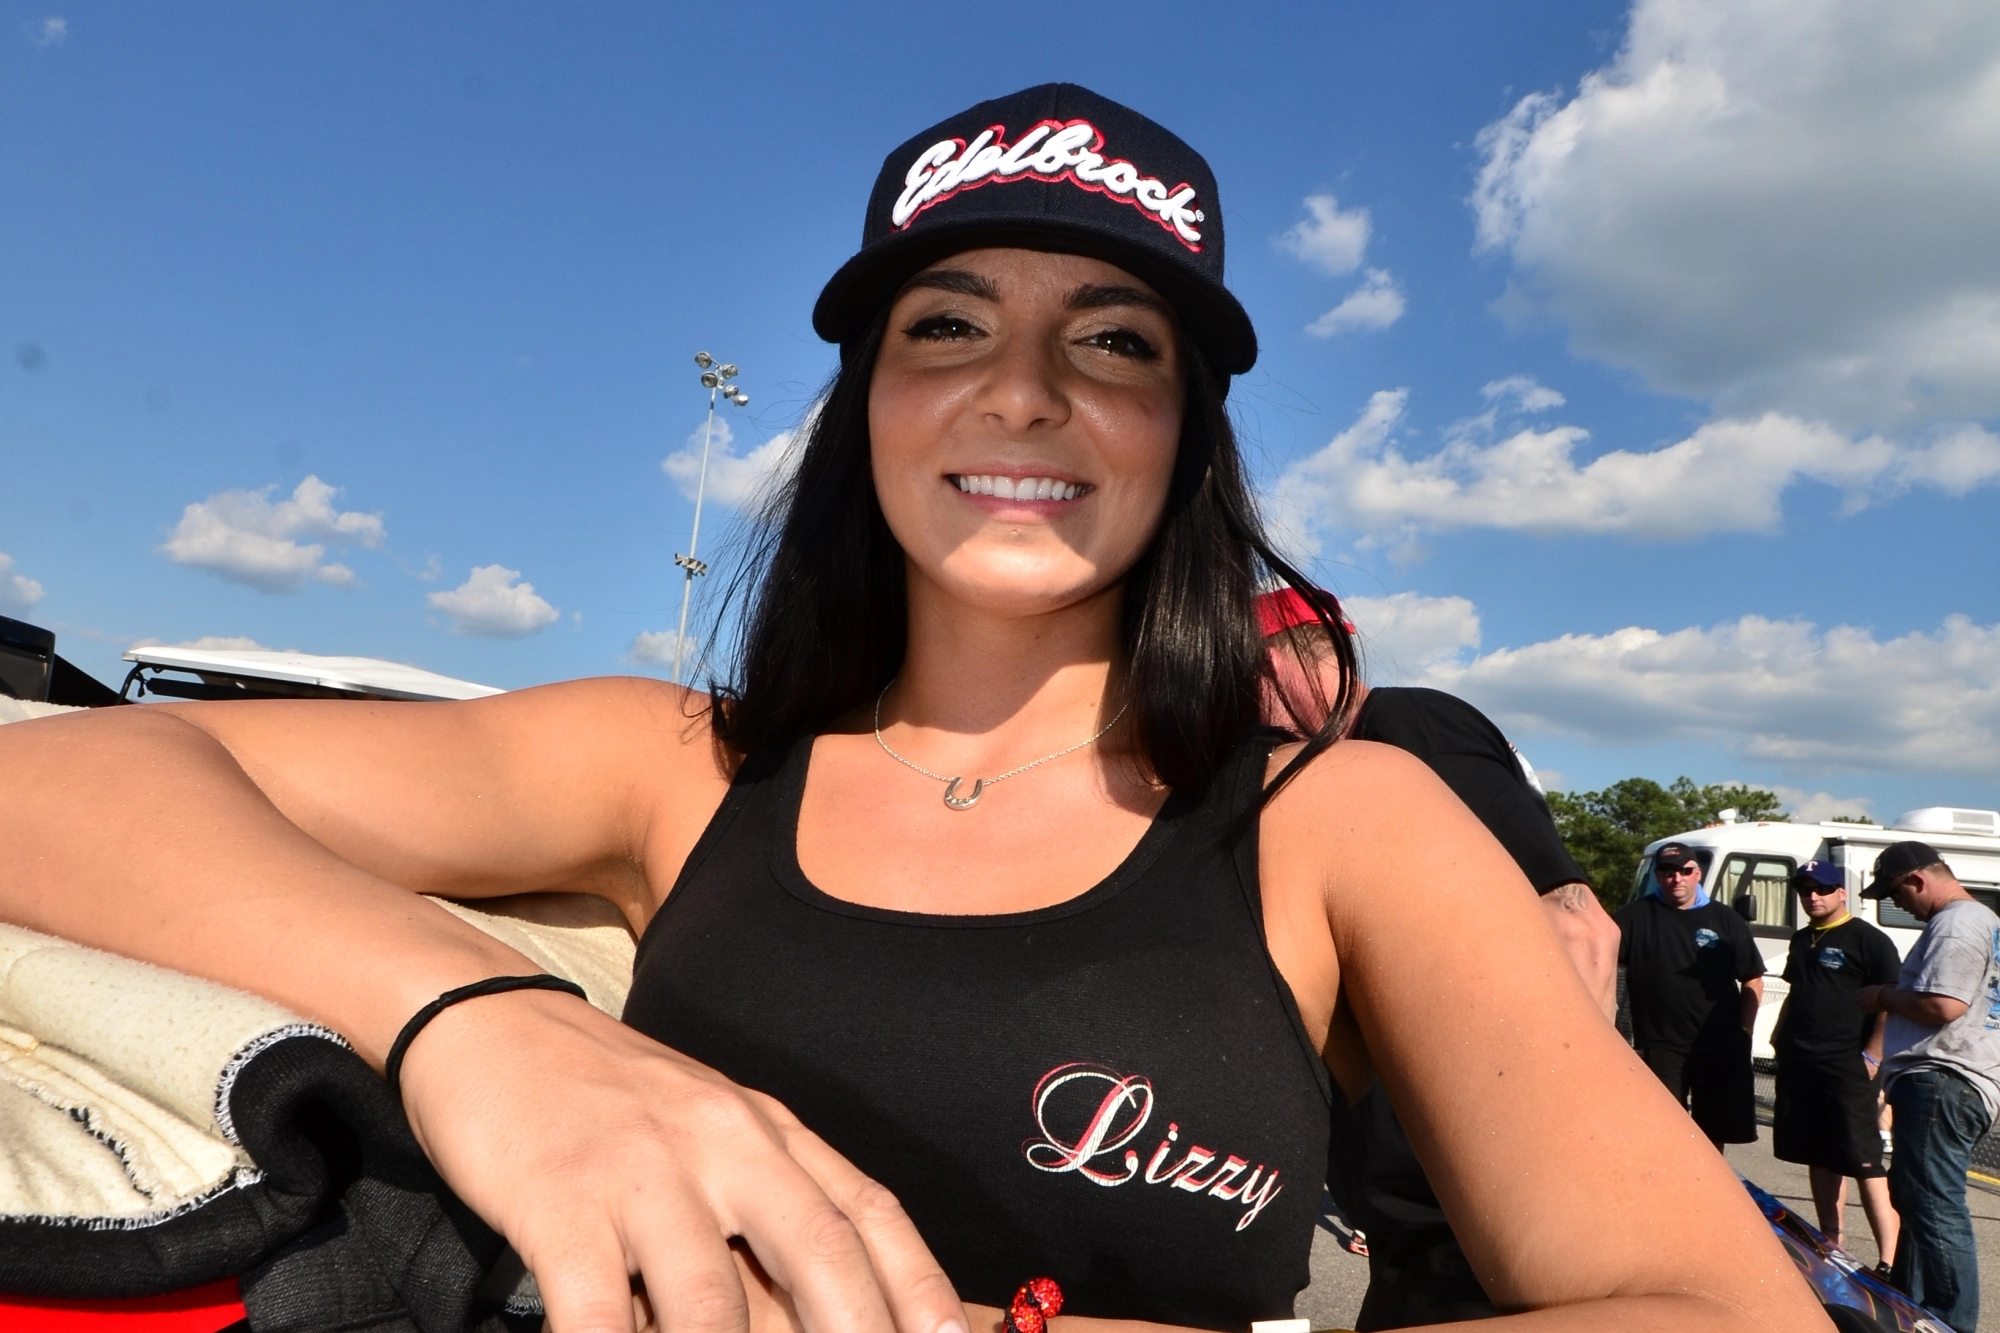 Who Is Lizzy Musi? Age, Bio, Career And More Information About The Professional Drag Racer